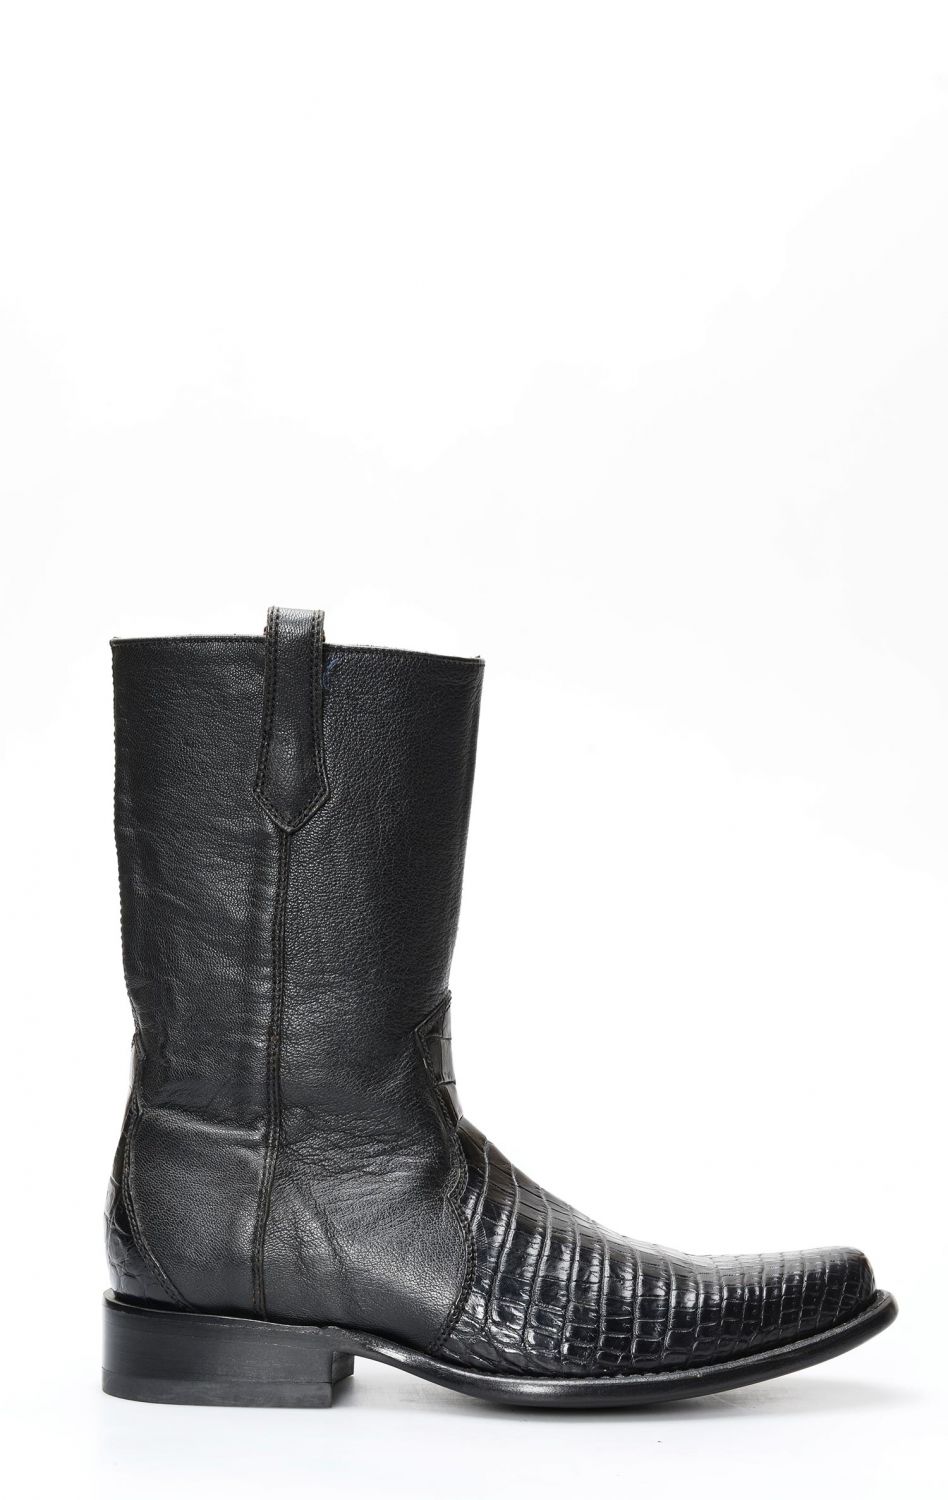 Cuadra boots with zipper in black crocodile belly skin | CLMOBYS4MOBYNE